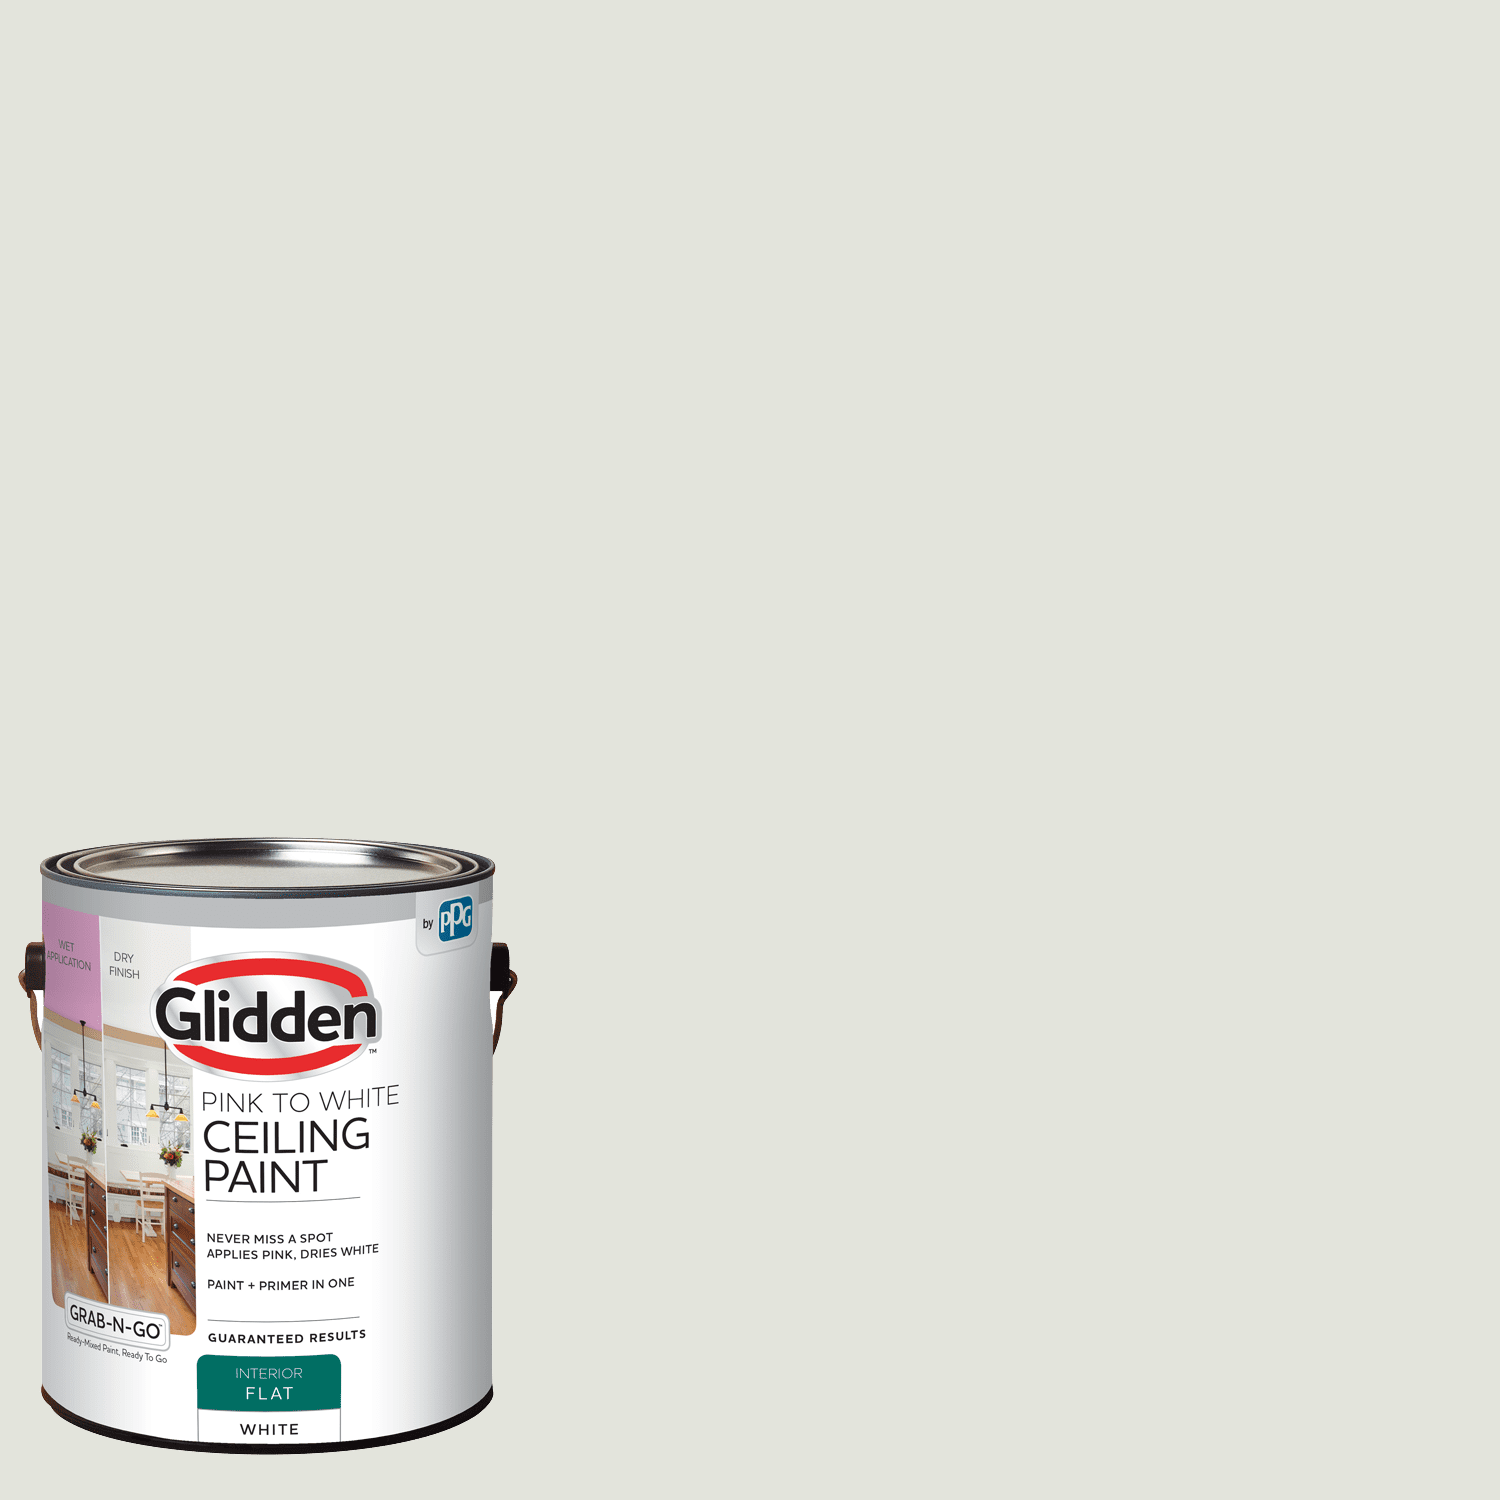 Glidden Grab-N-Go Interior Ceiling Paint Flat, Pink to White, 1 Gallon